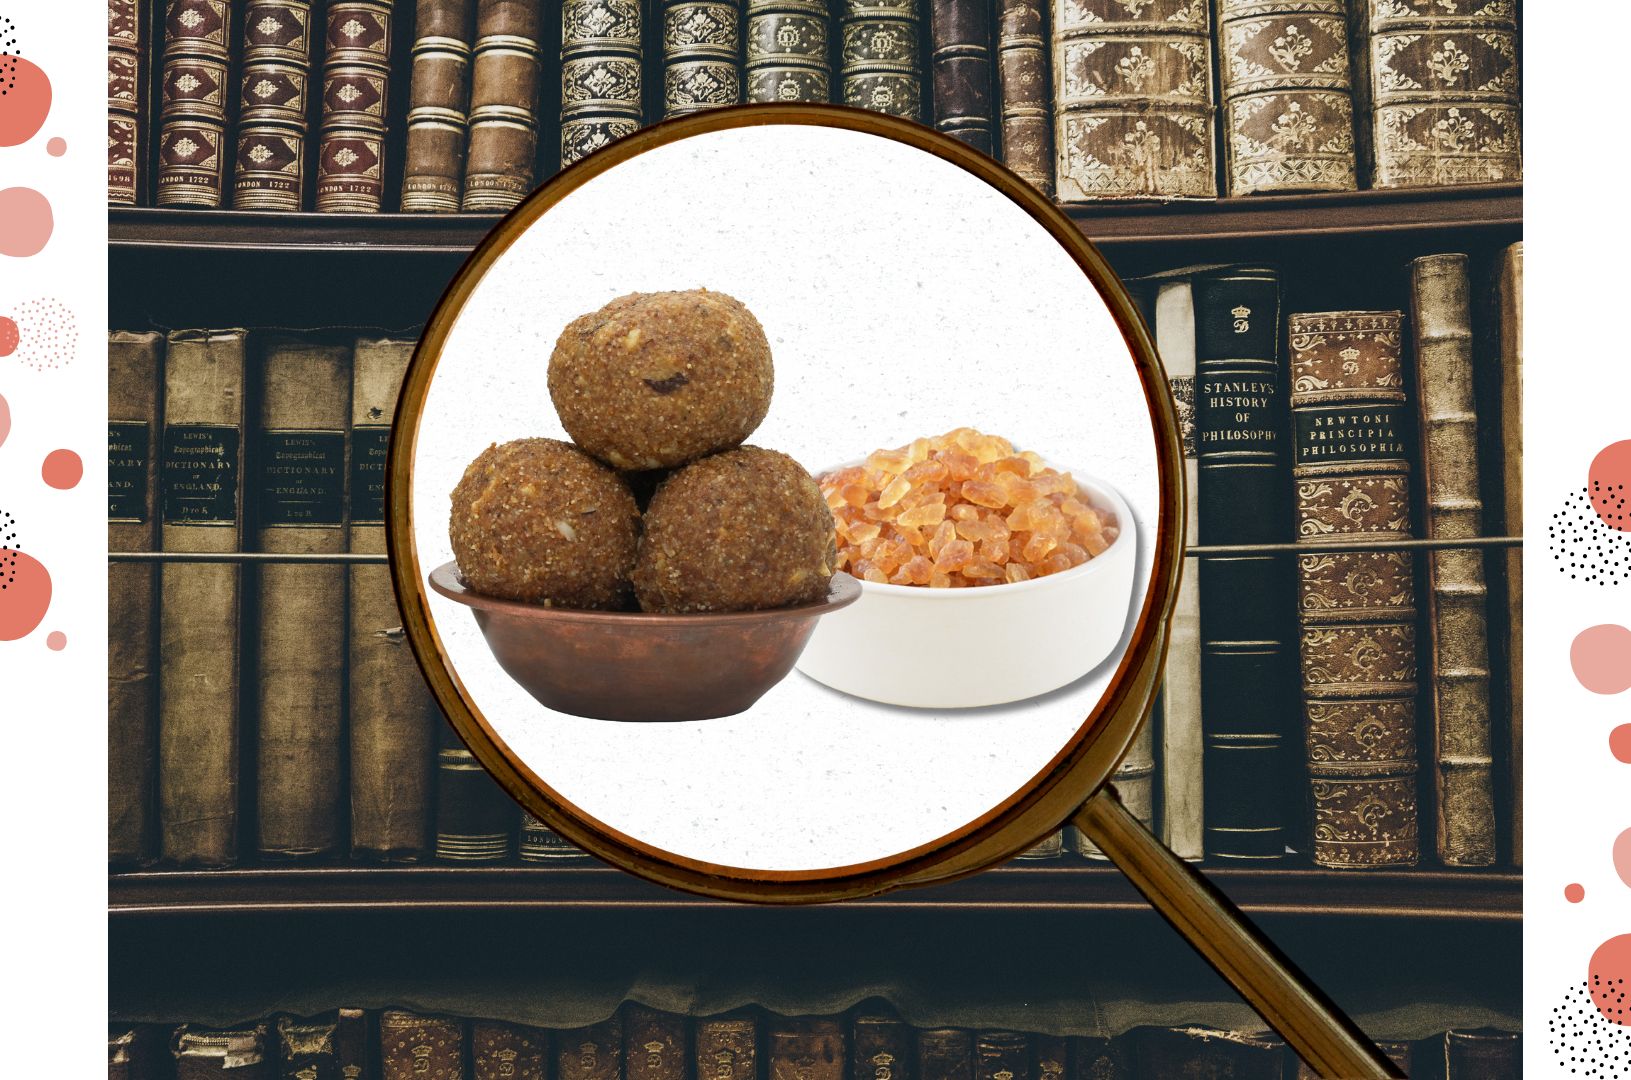 History of Gond Laddoo